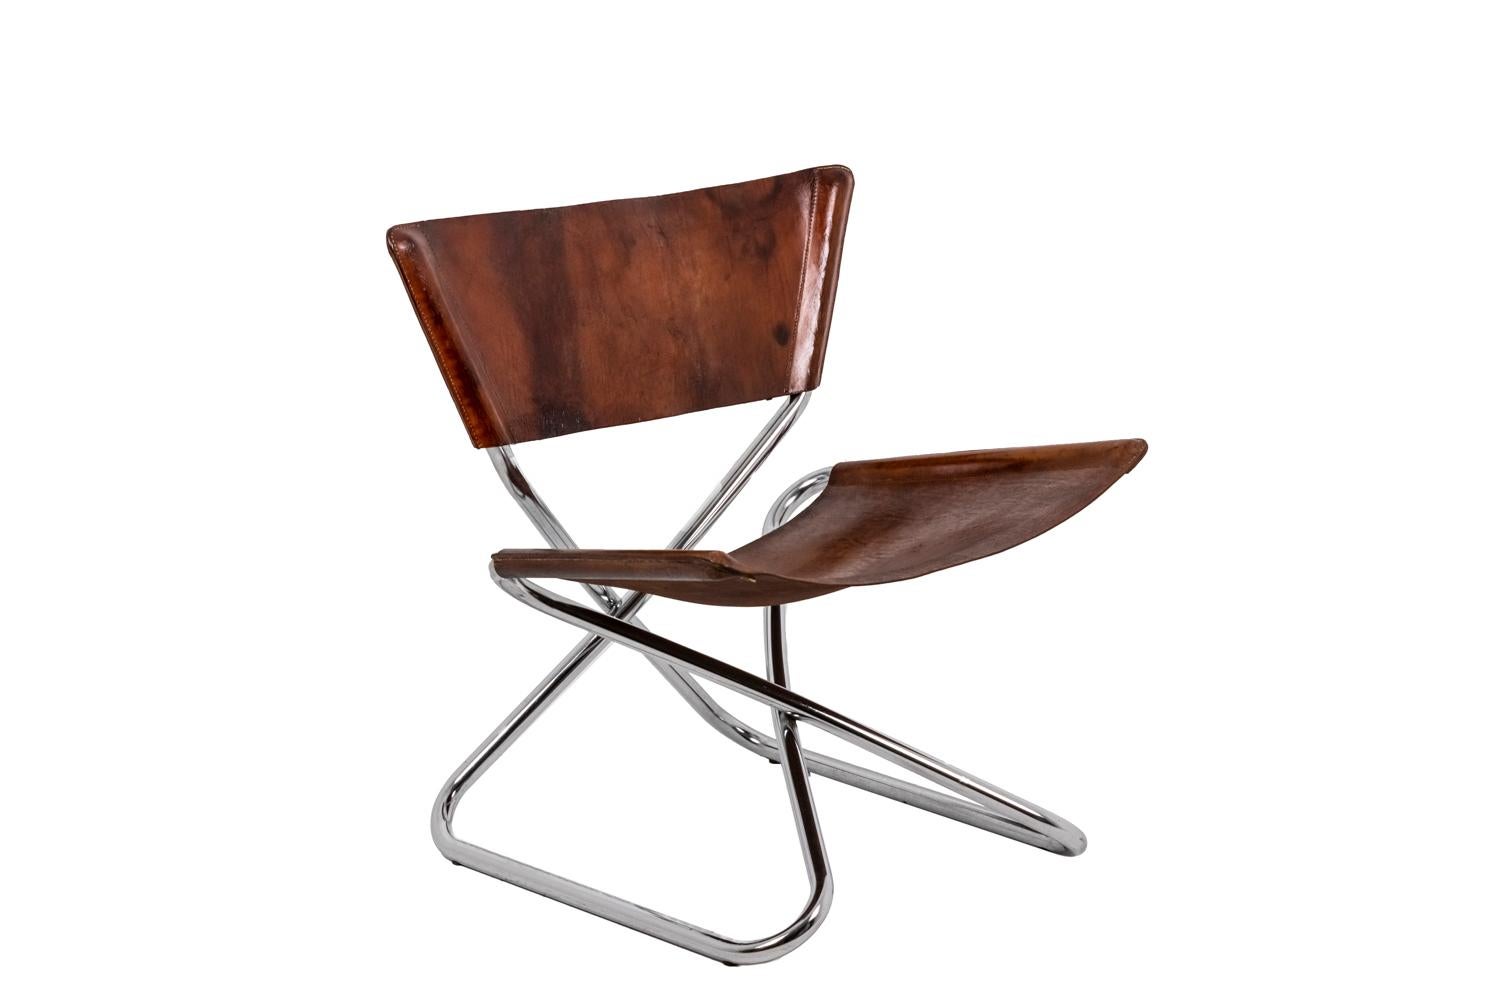 Folding chair staying on a tubular structure in chromed steel. Seat and back in brown leather. Cantilever chair without back leg.

Danish work realized in 1968.

Erik Magnussen (1940- ) is a Danish designer and ceramist. After studying Ceramics